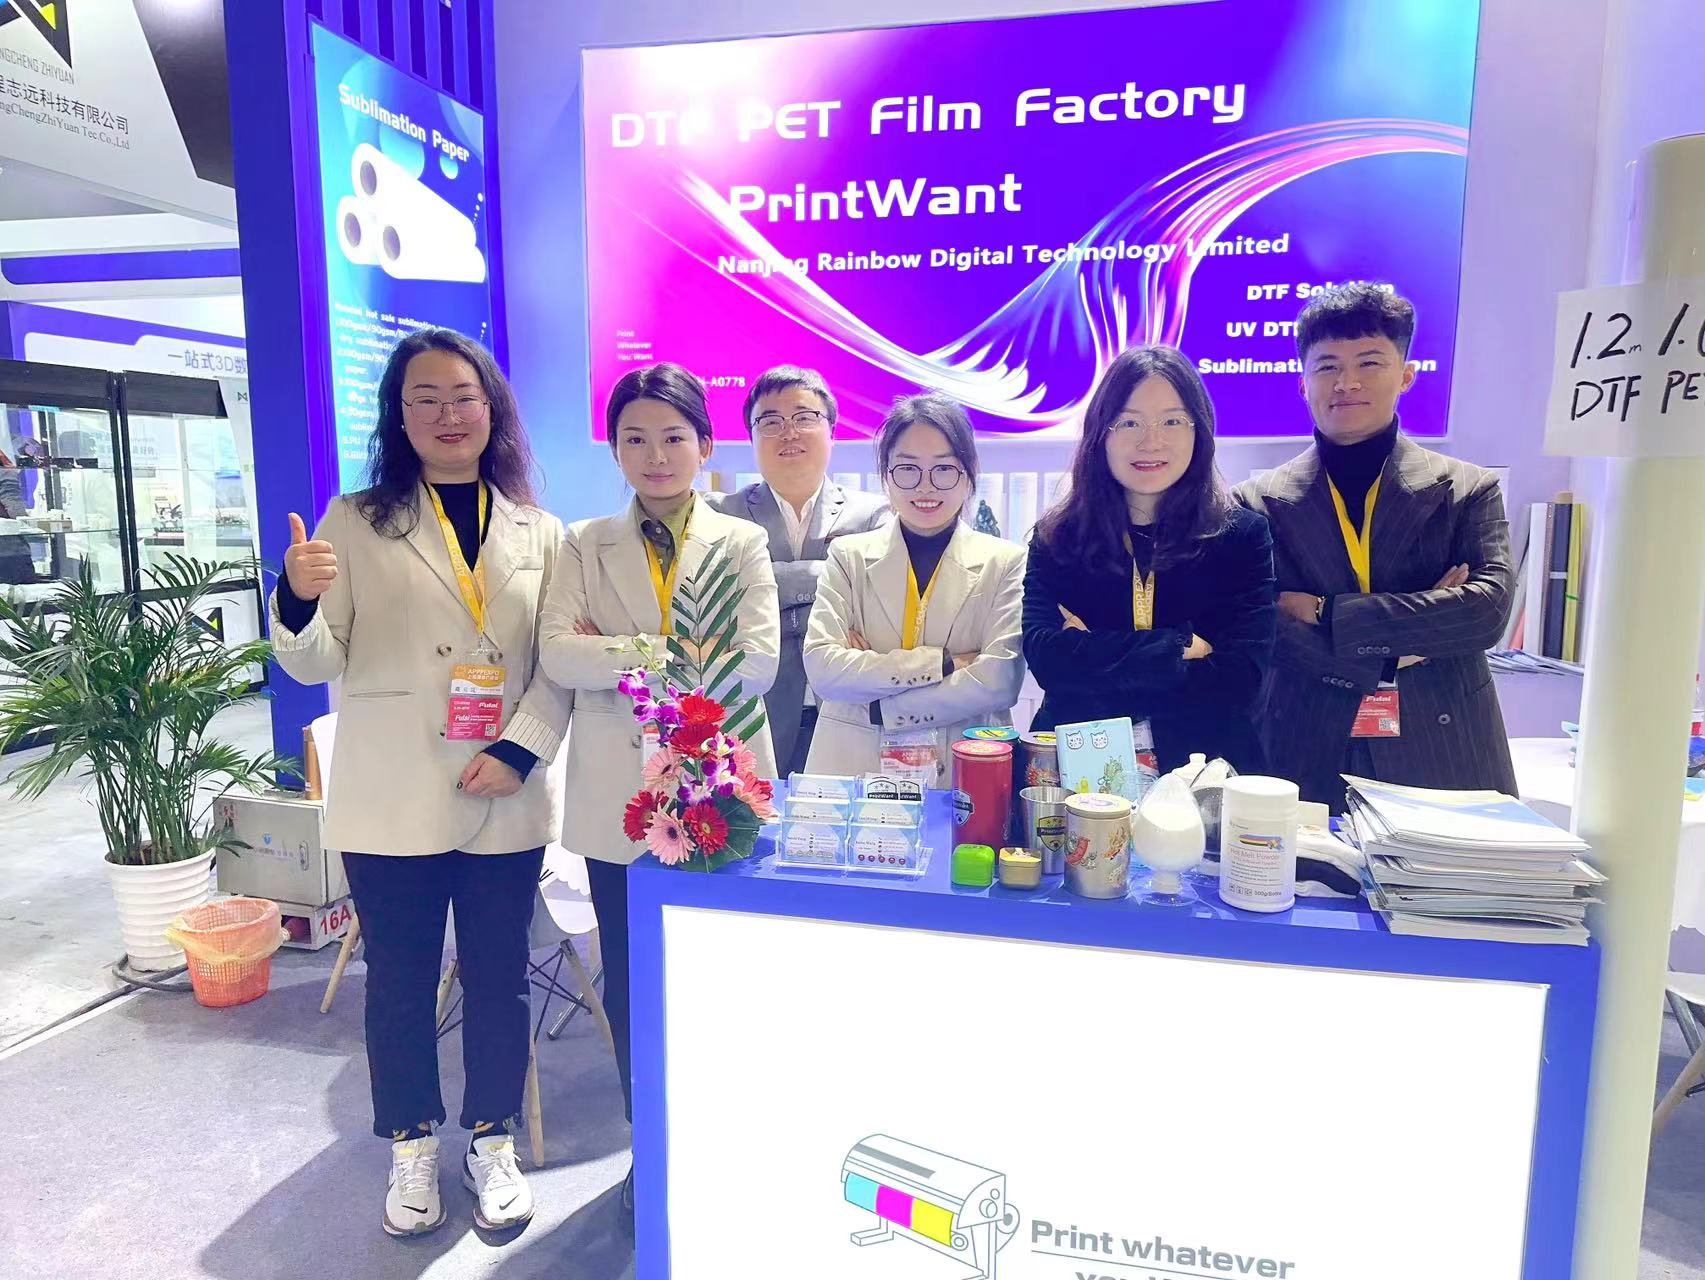 PrintWant's DTF Film shined at the Shanghai APPP exhibition!